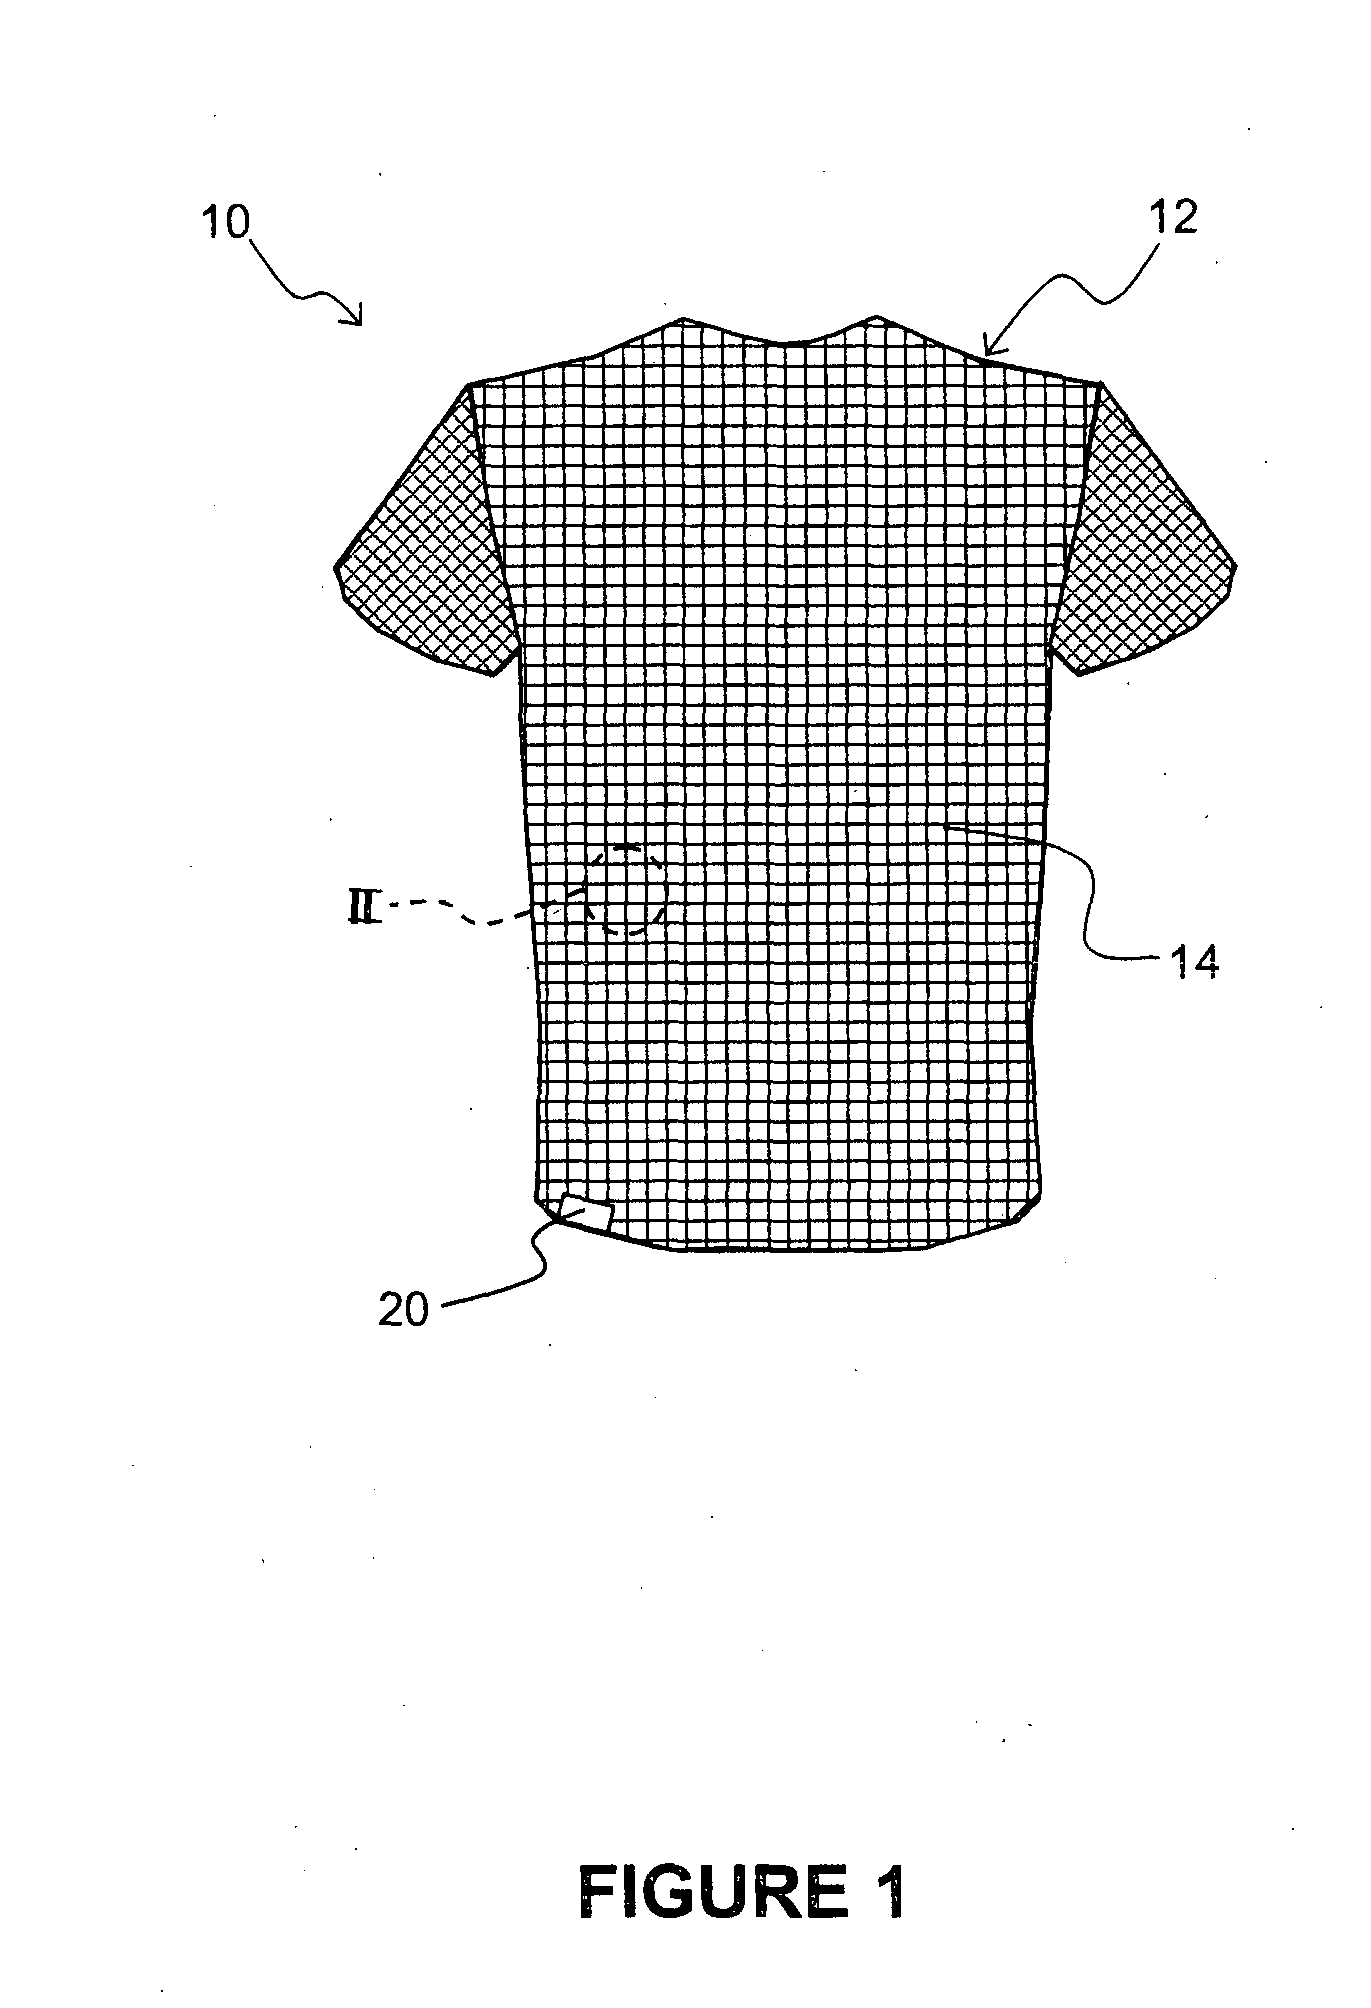 Apparatus for determining a dimension of a selected surface of an object